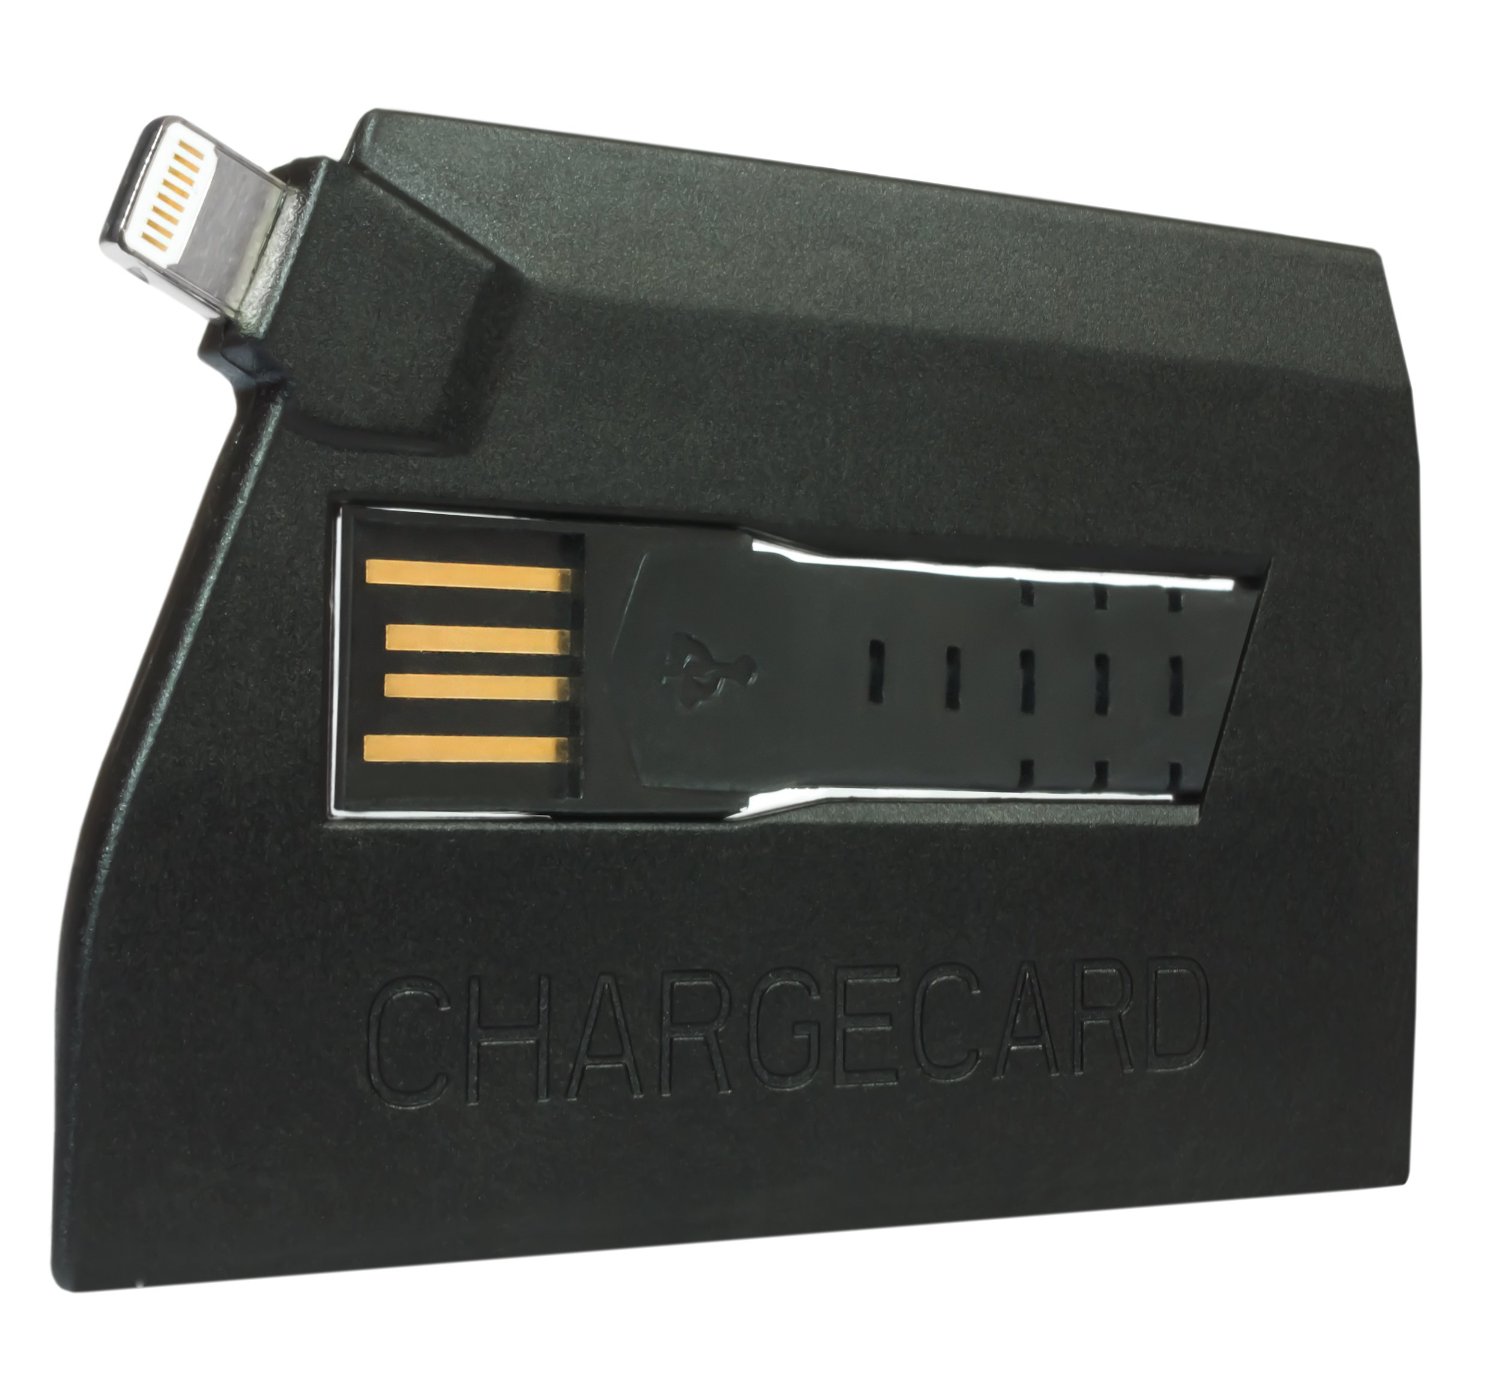 Geek insider, geekinsider, geekinsider. Com,, always have a backup phone charger with chargecard by nomad, uncategorized